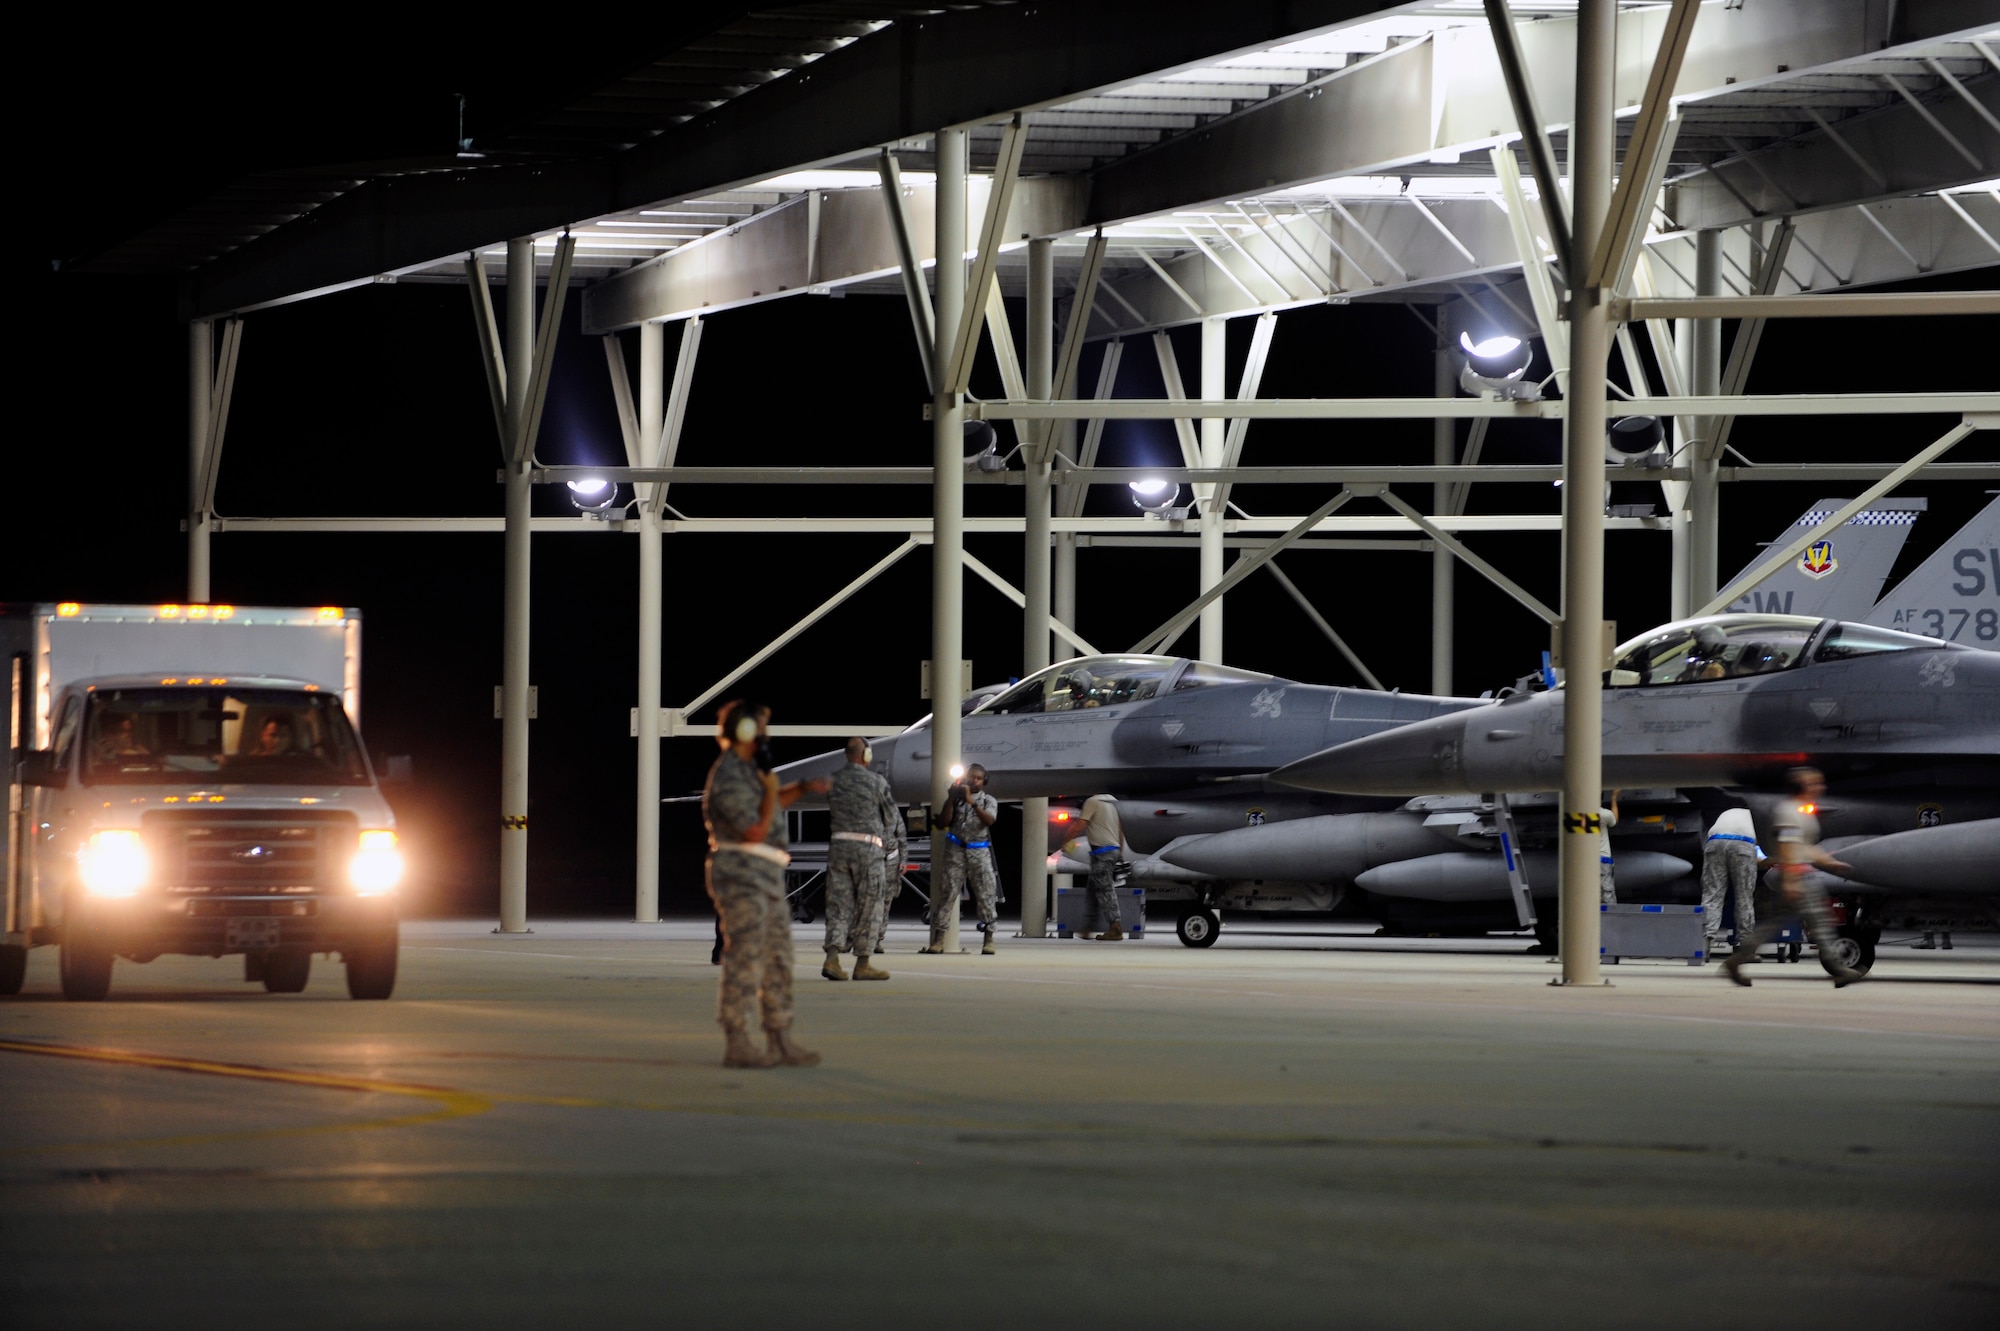 Airmen from the 20th Aircraft Maintenance Squadron scramble on the flightline to support the 77th Fighter Squadron as they depart for Operation Unified Protector. The 20th Fighter Wing received short notice deployment orders and departed in less than 48 hours. (U.S. Air Force photo by Tech. Sgt. Louis Rivers/Released)